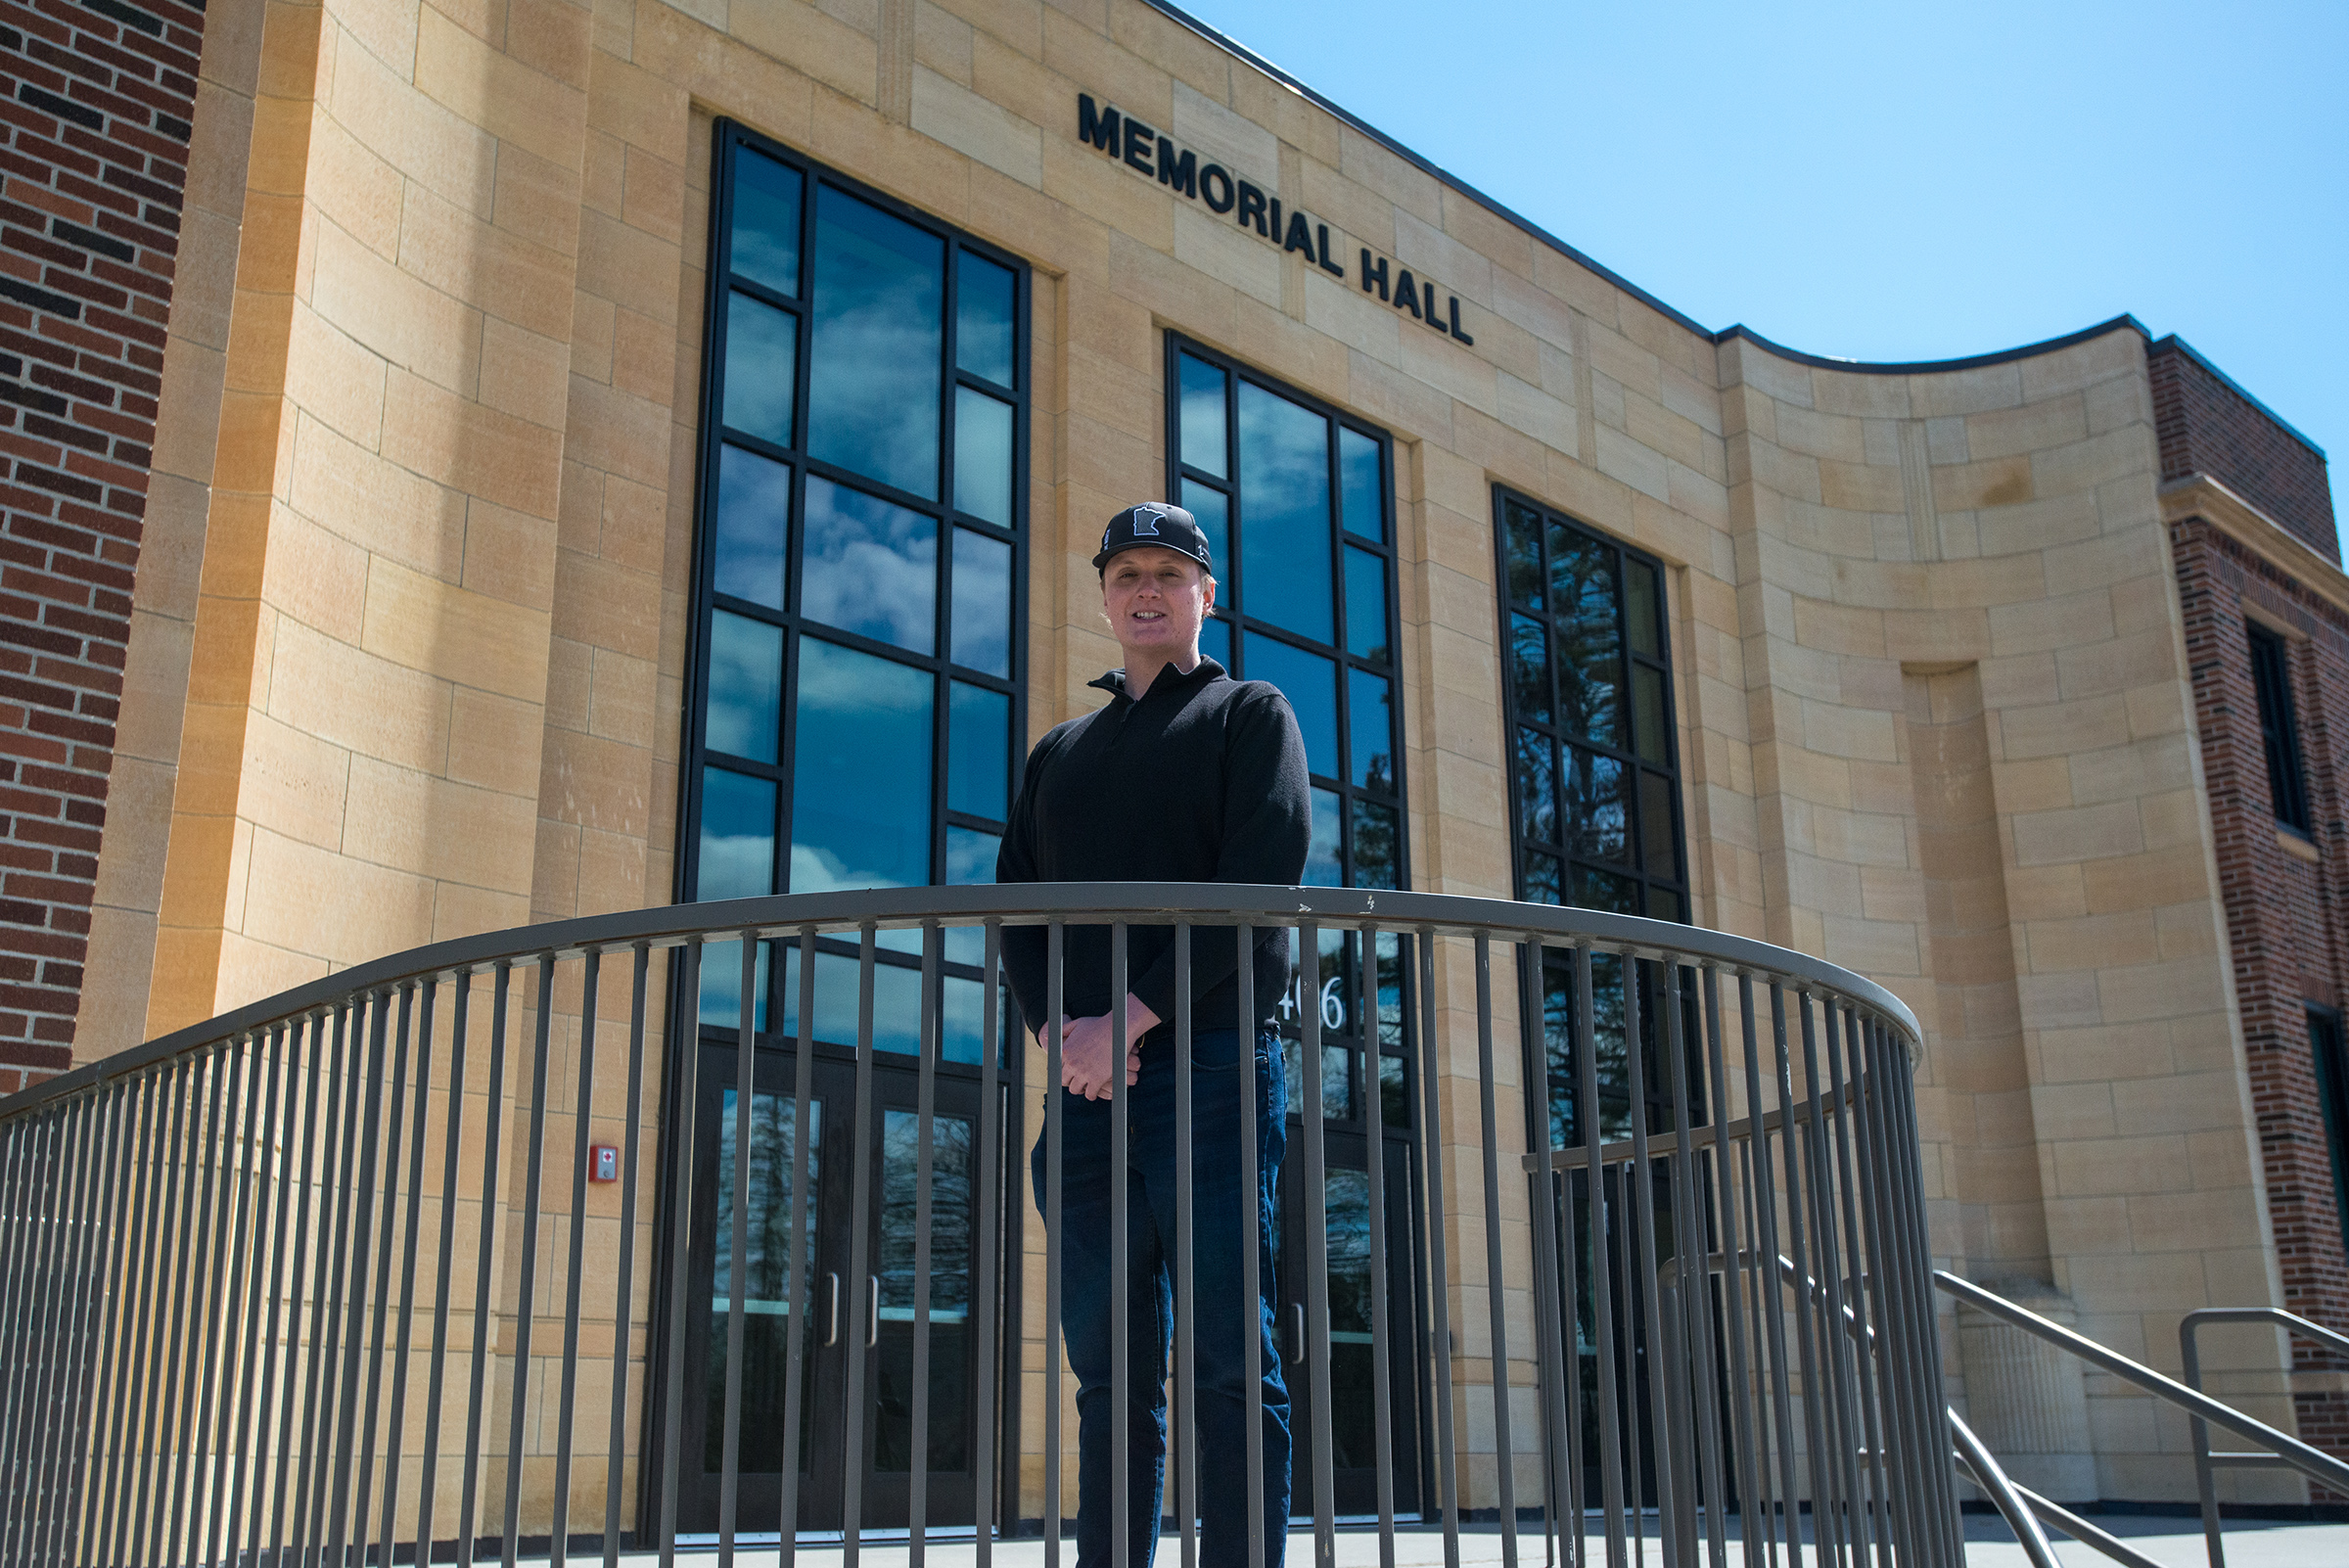 Jack Lundgren stands in front of Memorial Hall on the BSU campus